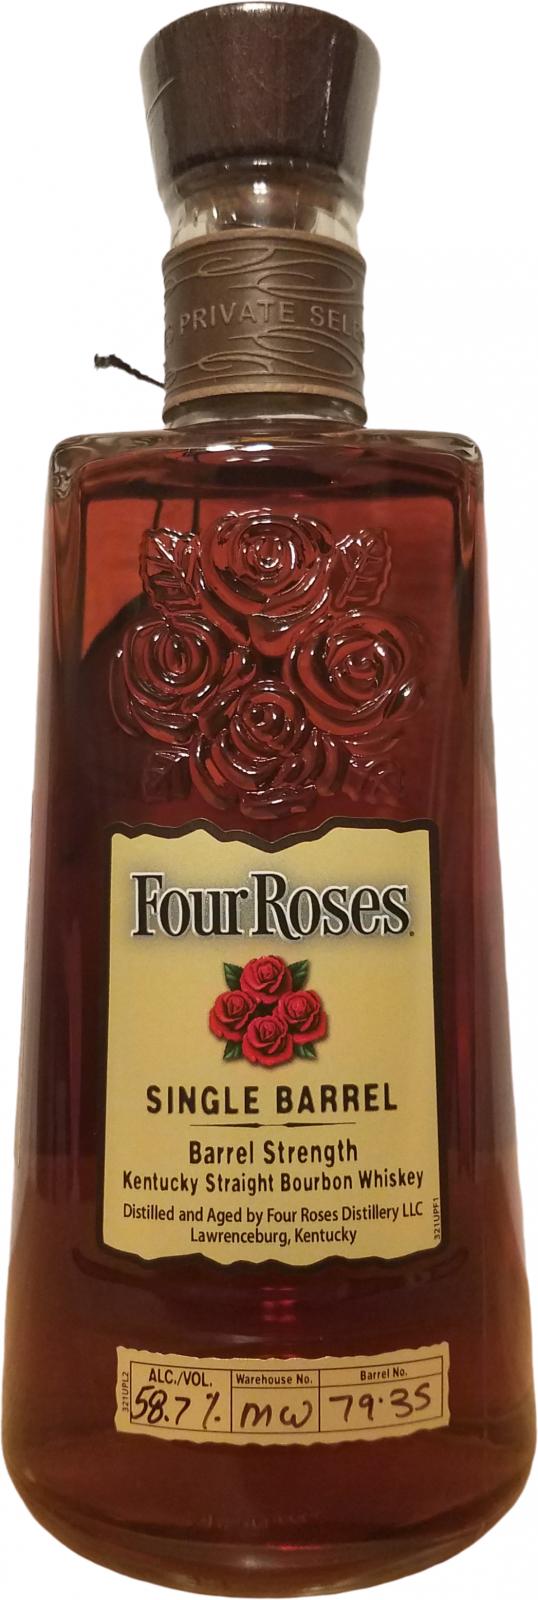 Four Roses Single Barrel Private Selection OESF 79-35 Total WIne & More 58.7% 750ml